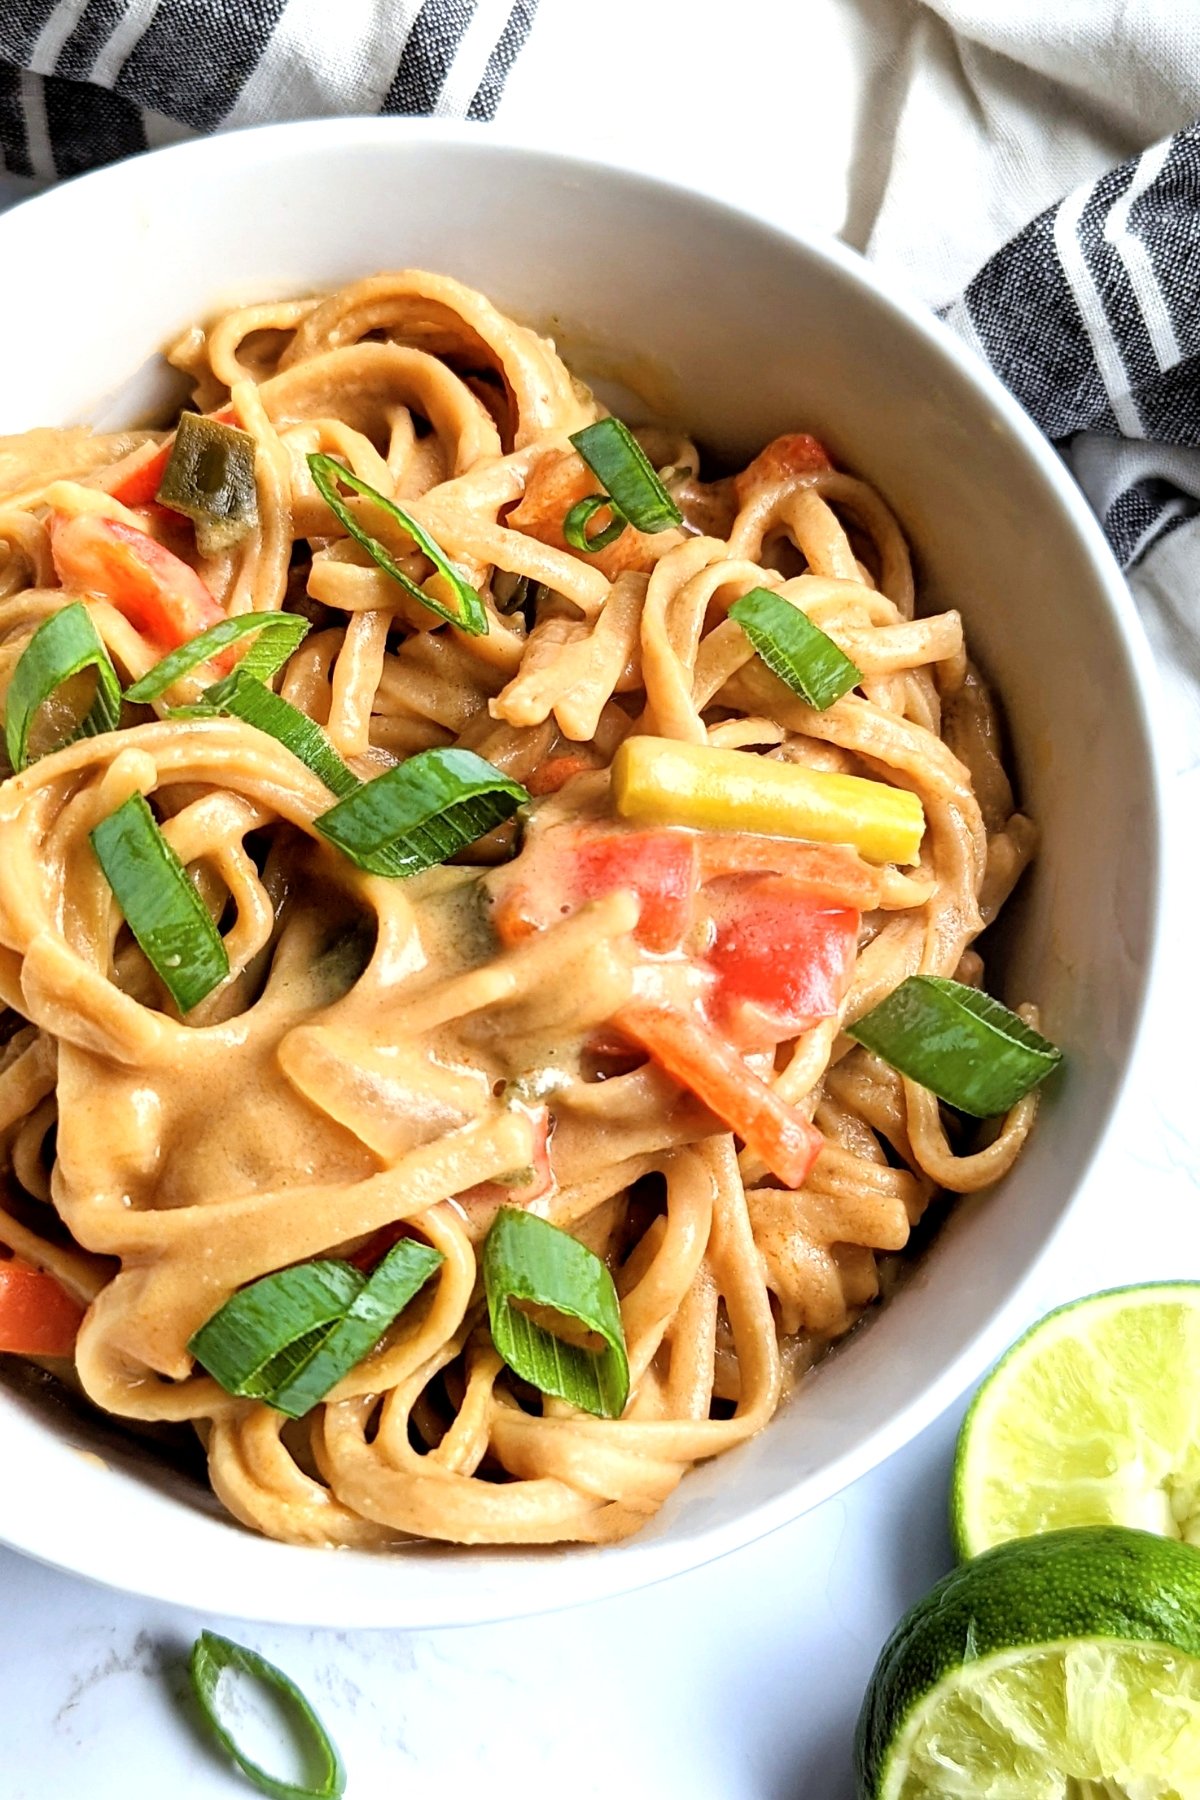 low sodium noodles with peanut sauce without salt healthy vegetable pasta dinner ideas with low sodium noodles